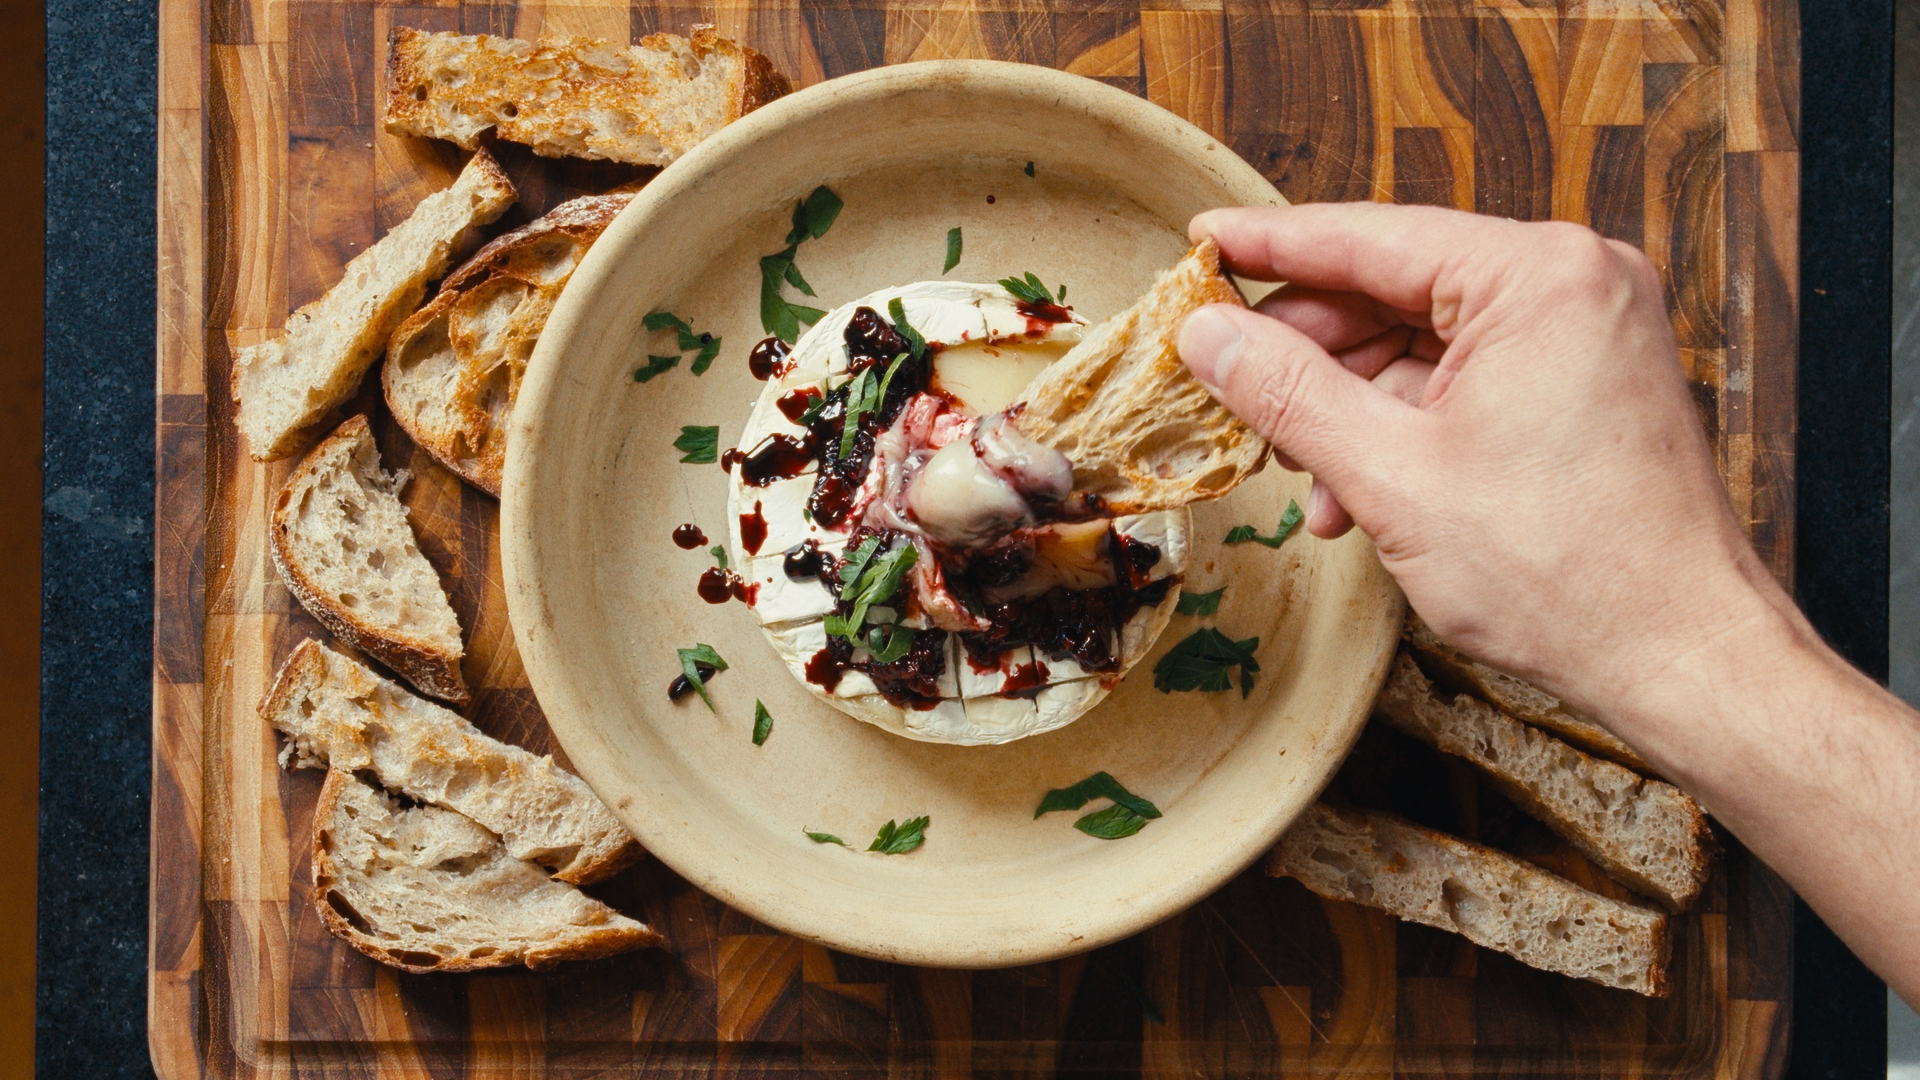 Baked Brie with Balsamic Blackberry Glaze